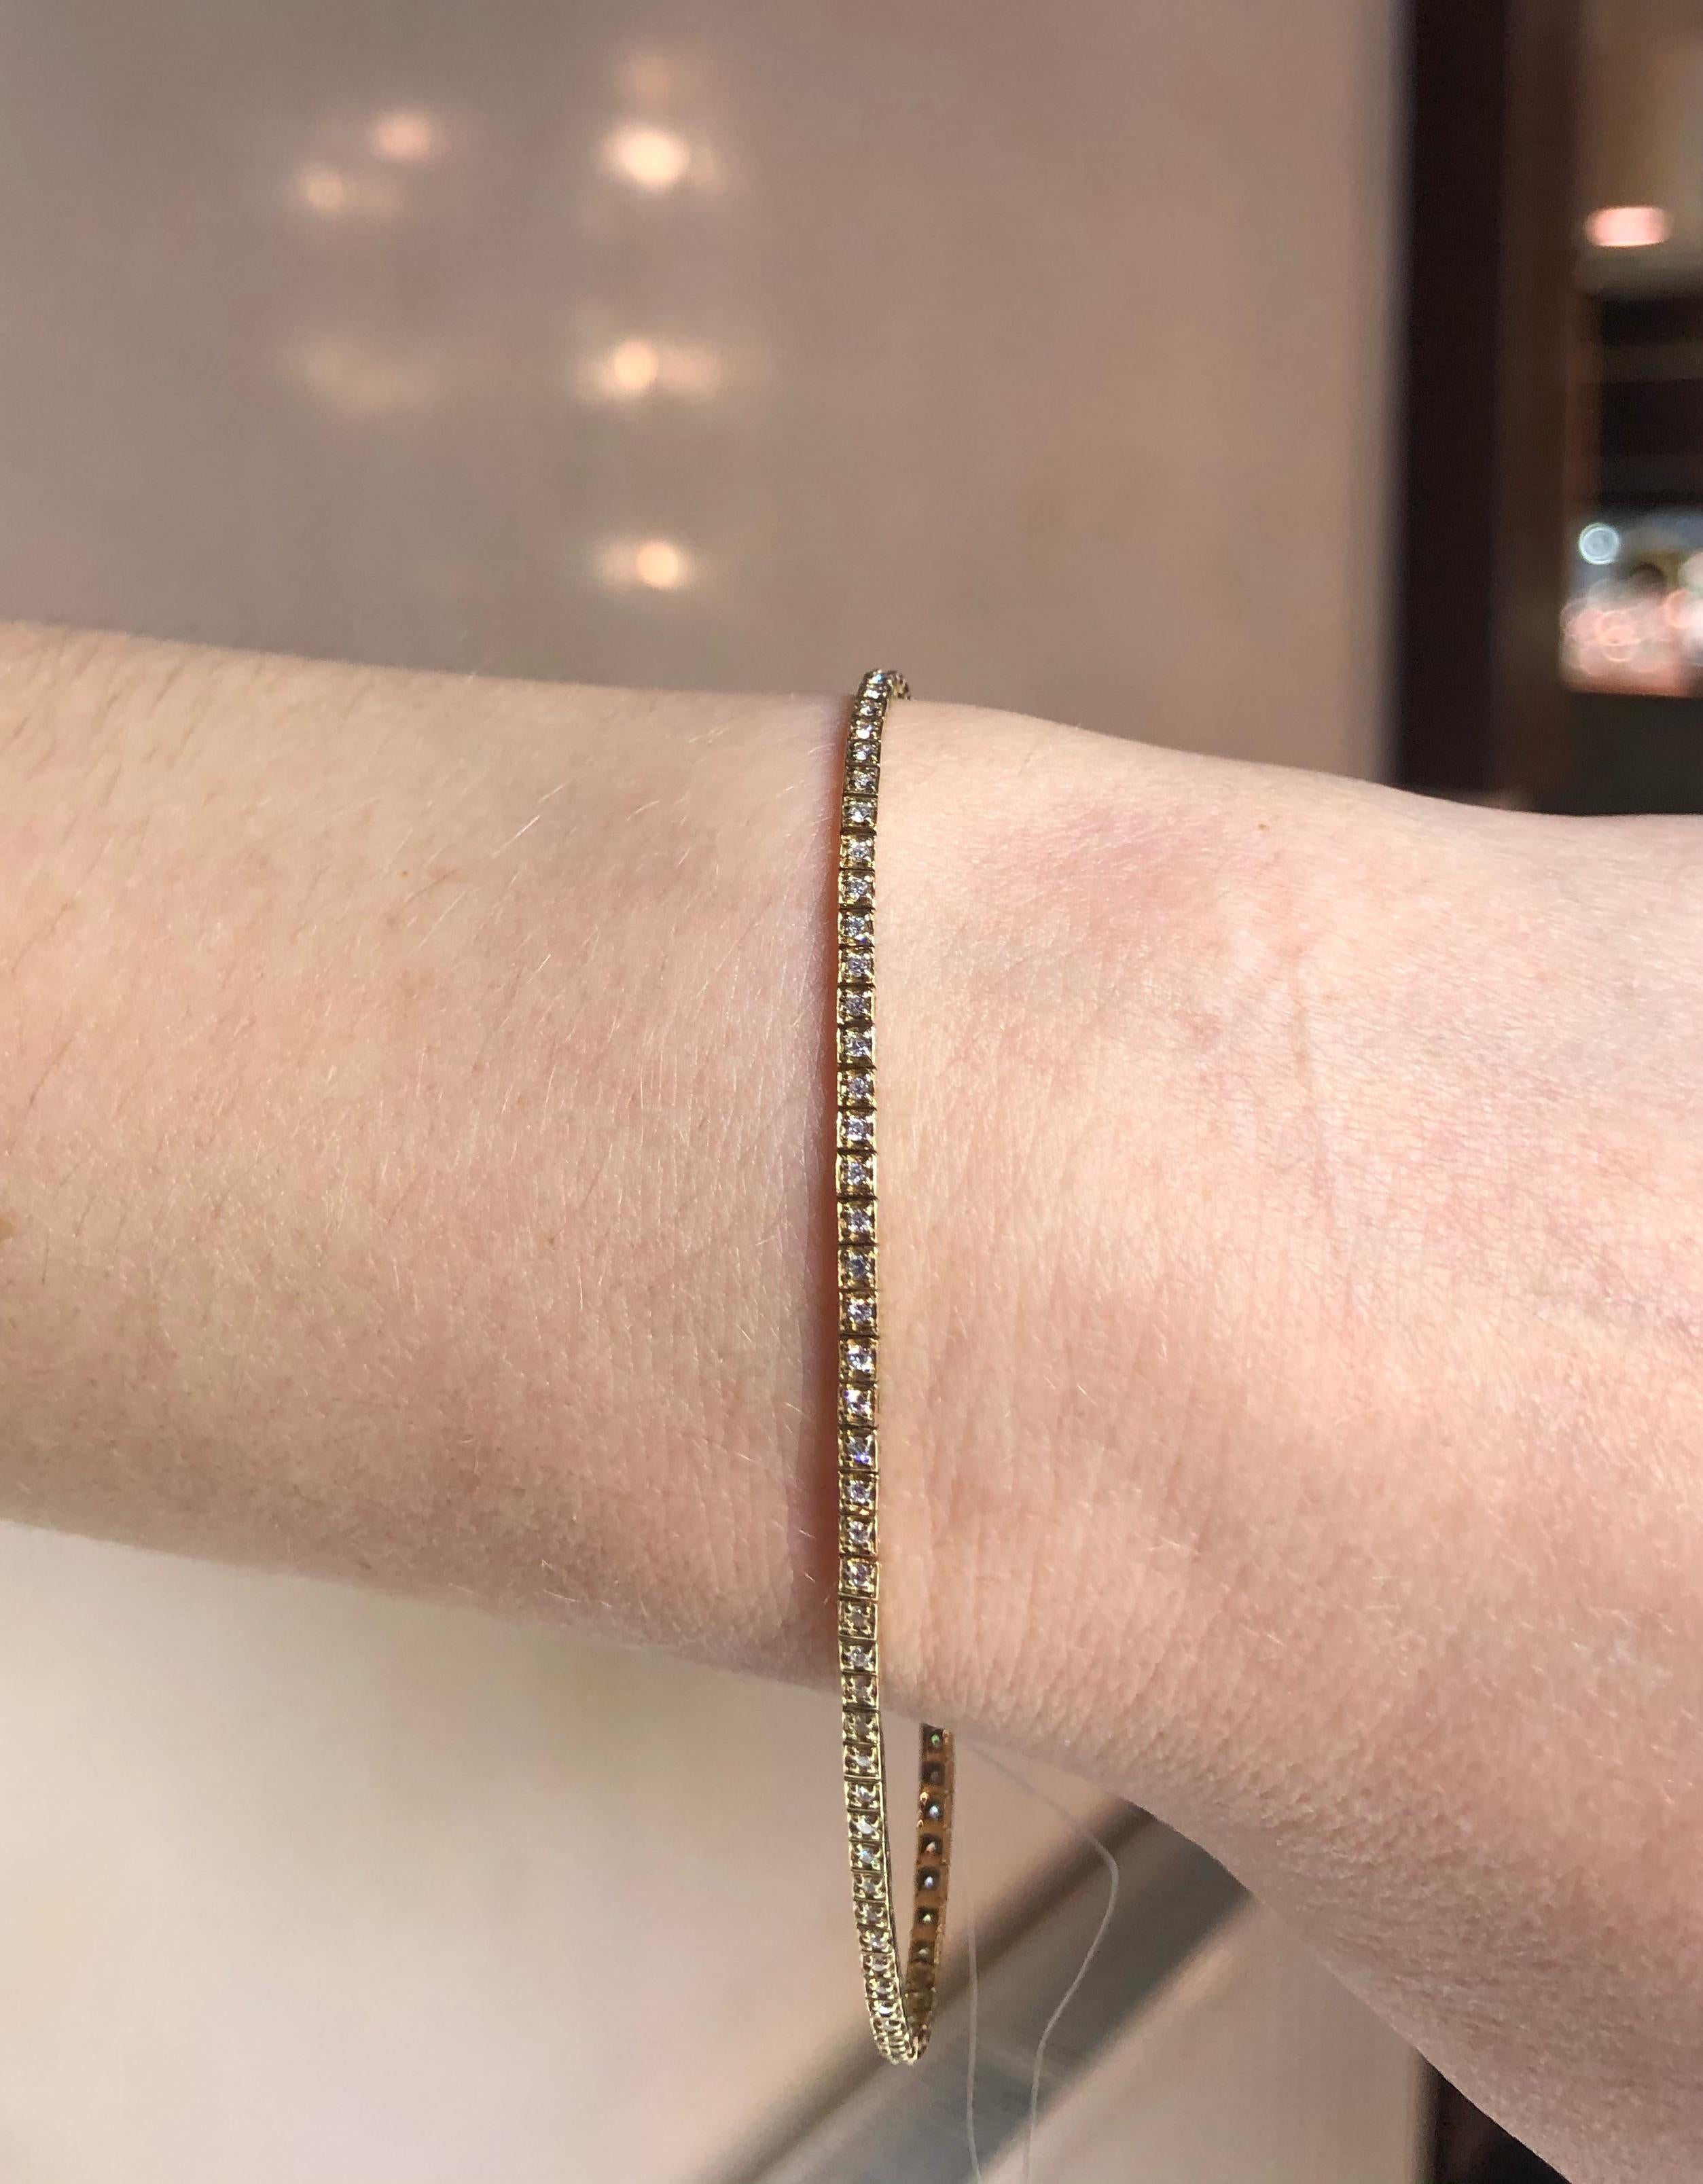 Bracelet Yellow Gold 14 K
Size 18.5
Діамант 90-Round 57-0,49-4/5A
Weight 3.99 grams

With a heritage of ancient fine Swiss jewelry traditions, NATKINA is a Geneva based jewellery brand, which creates modern jewellery masterpieces suitable for every